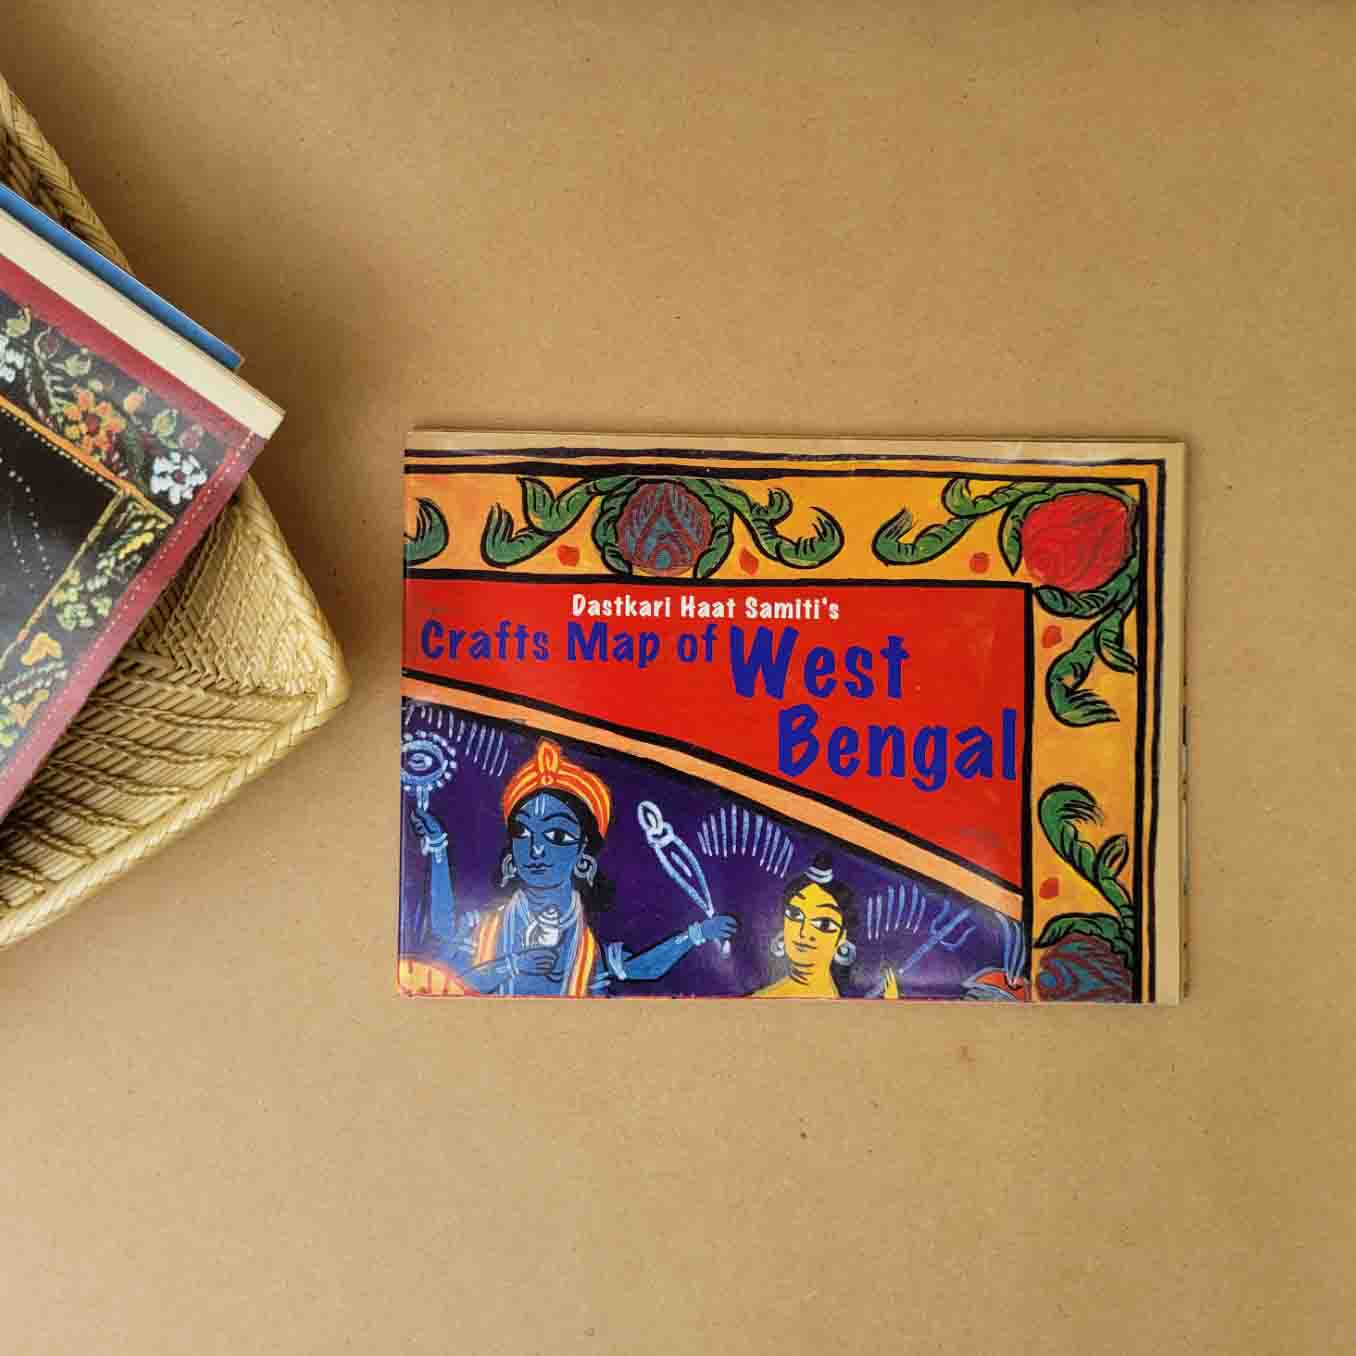 Crafts & Textiles Map of West Bengal, Double Side Print